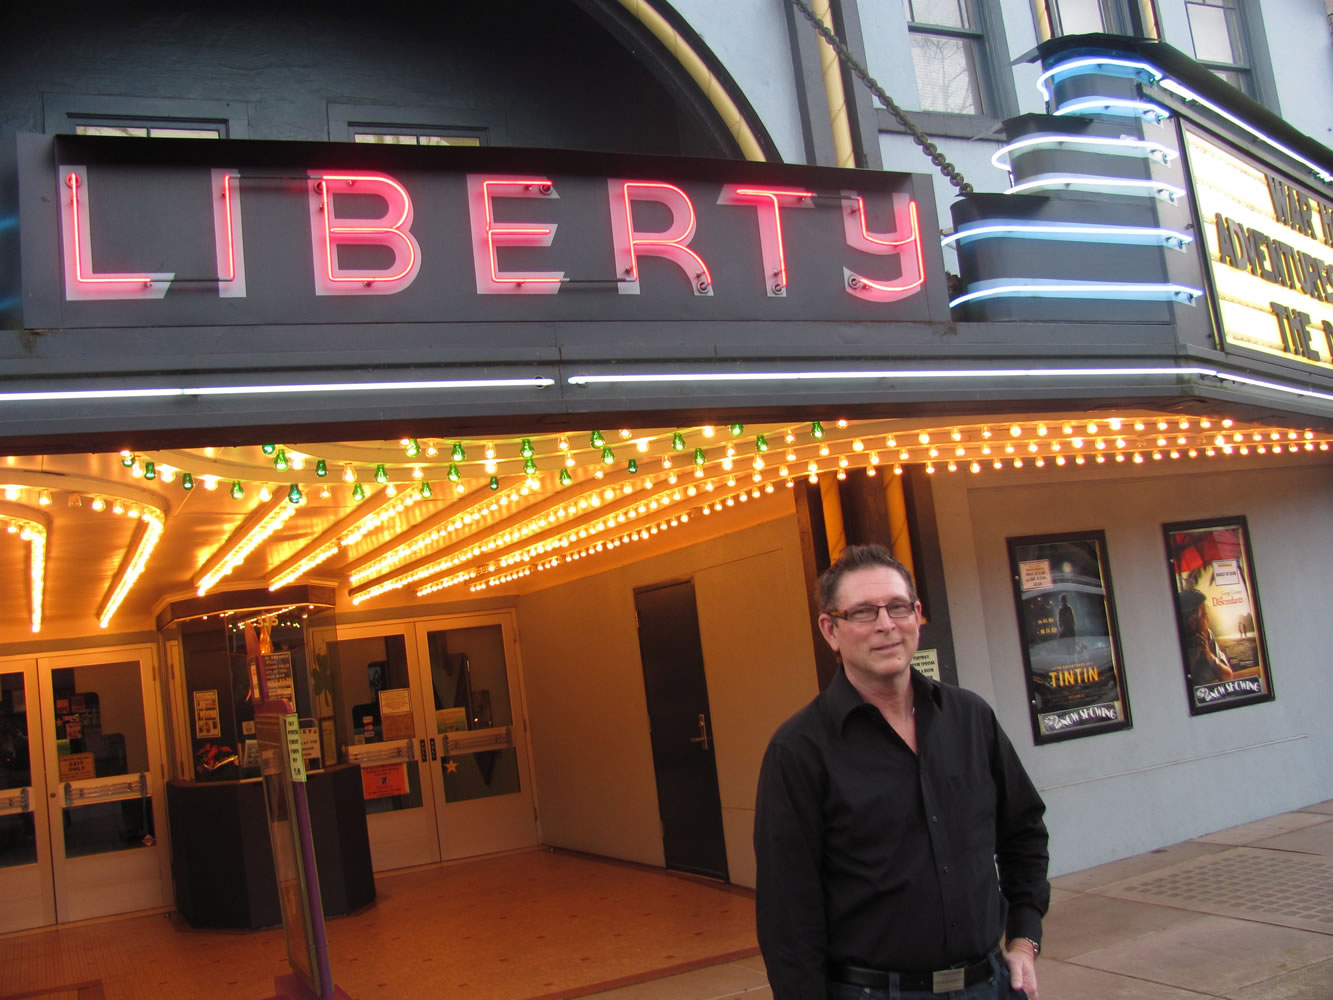 Rand Thornsley hopes more people will view movies at the Liberty Theatre, in downtown Camas. Thornsley, managing director of Rootstock Capital Management, LLC., signed a five-year lease on the theater in January 2011. Green lights have been added to the theater's entryway this month, to celebrate St. Patrick's Day.